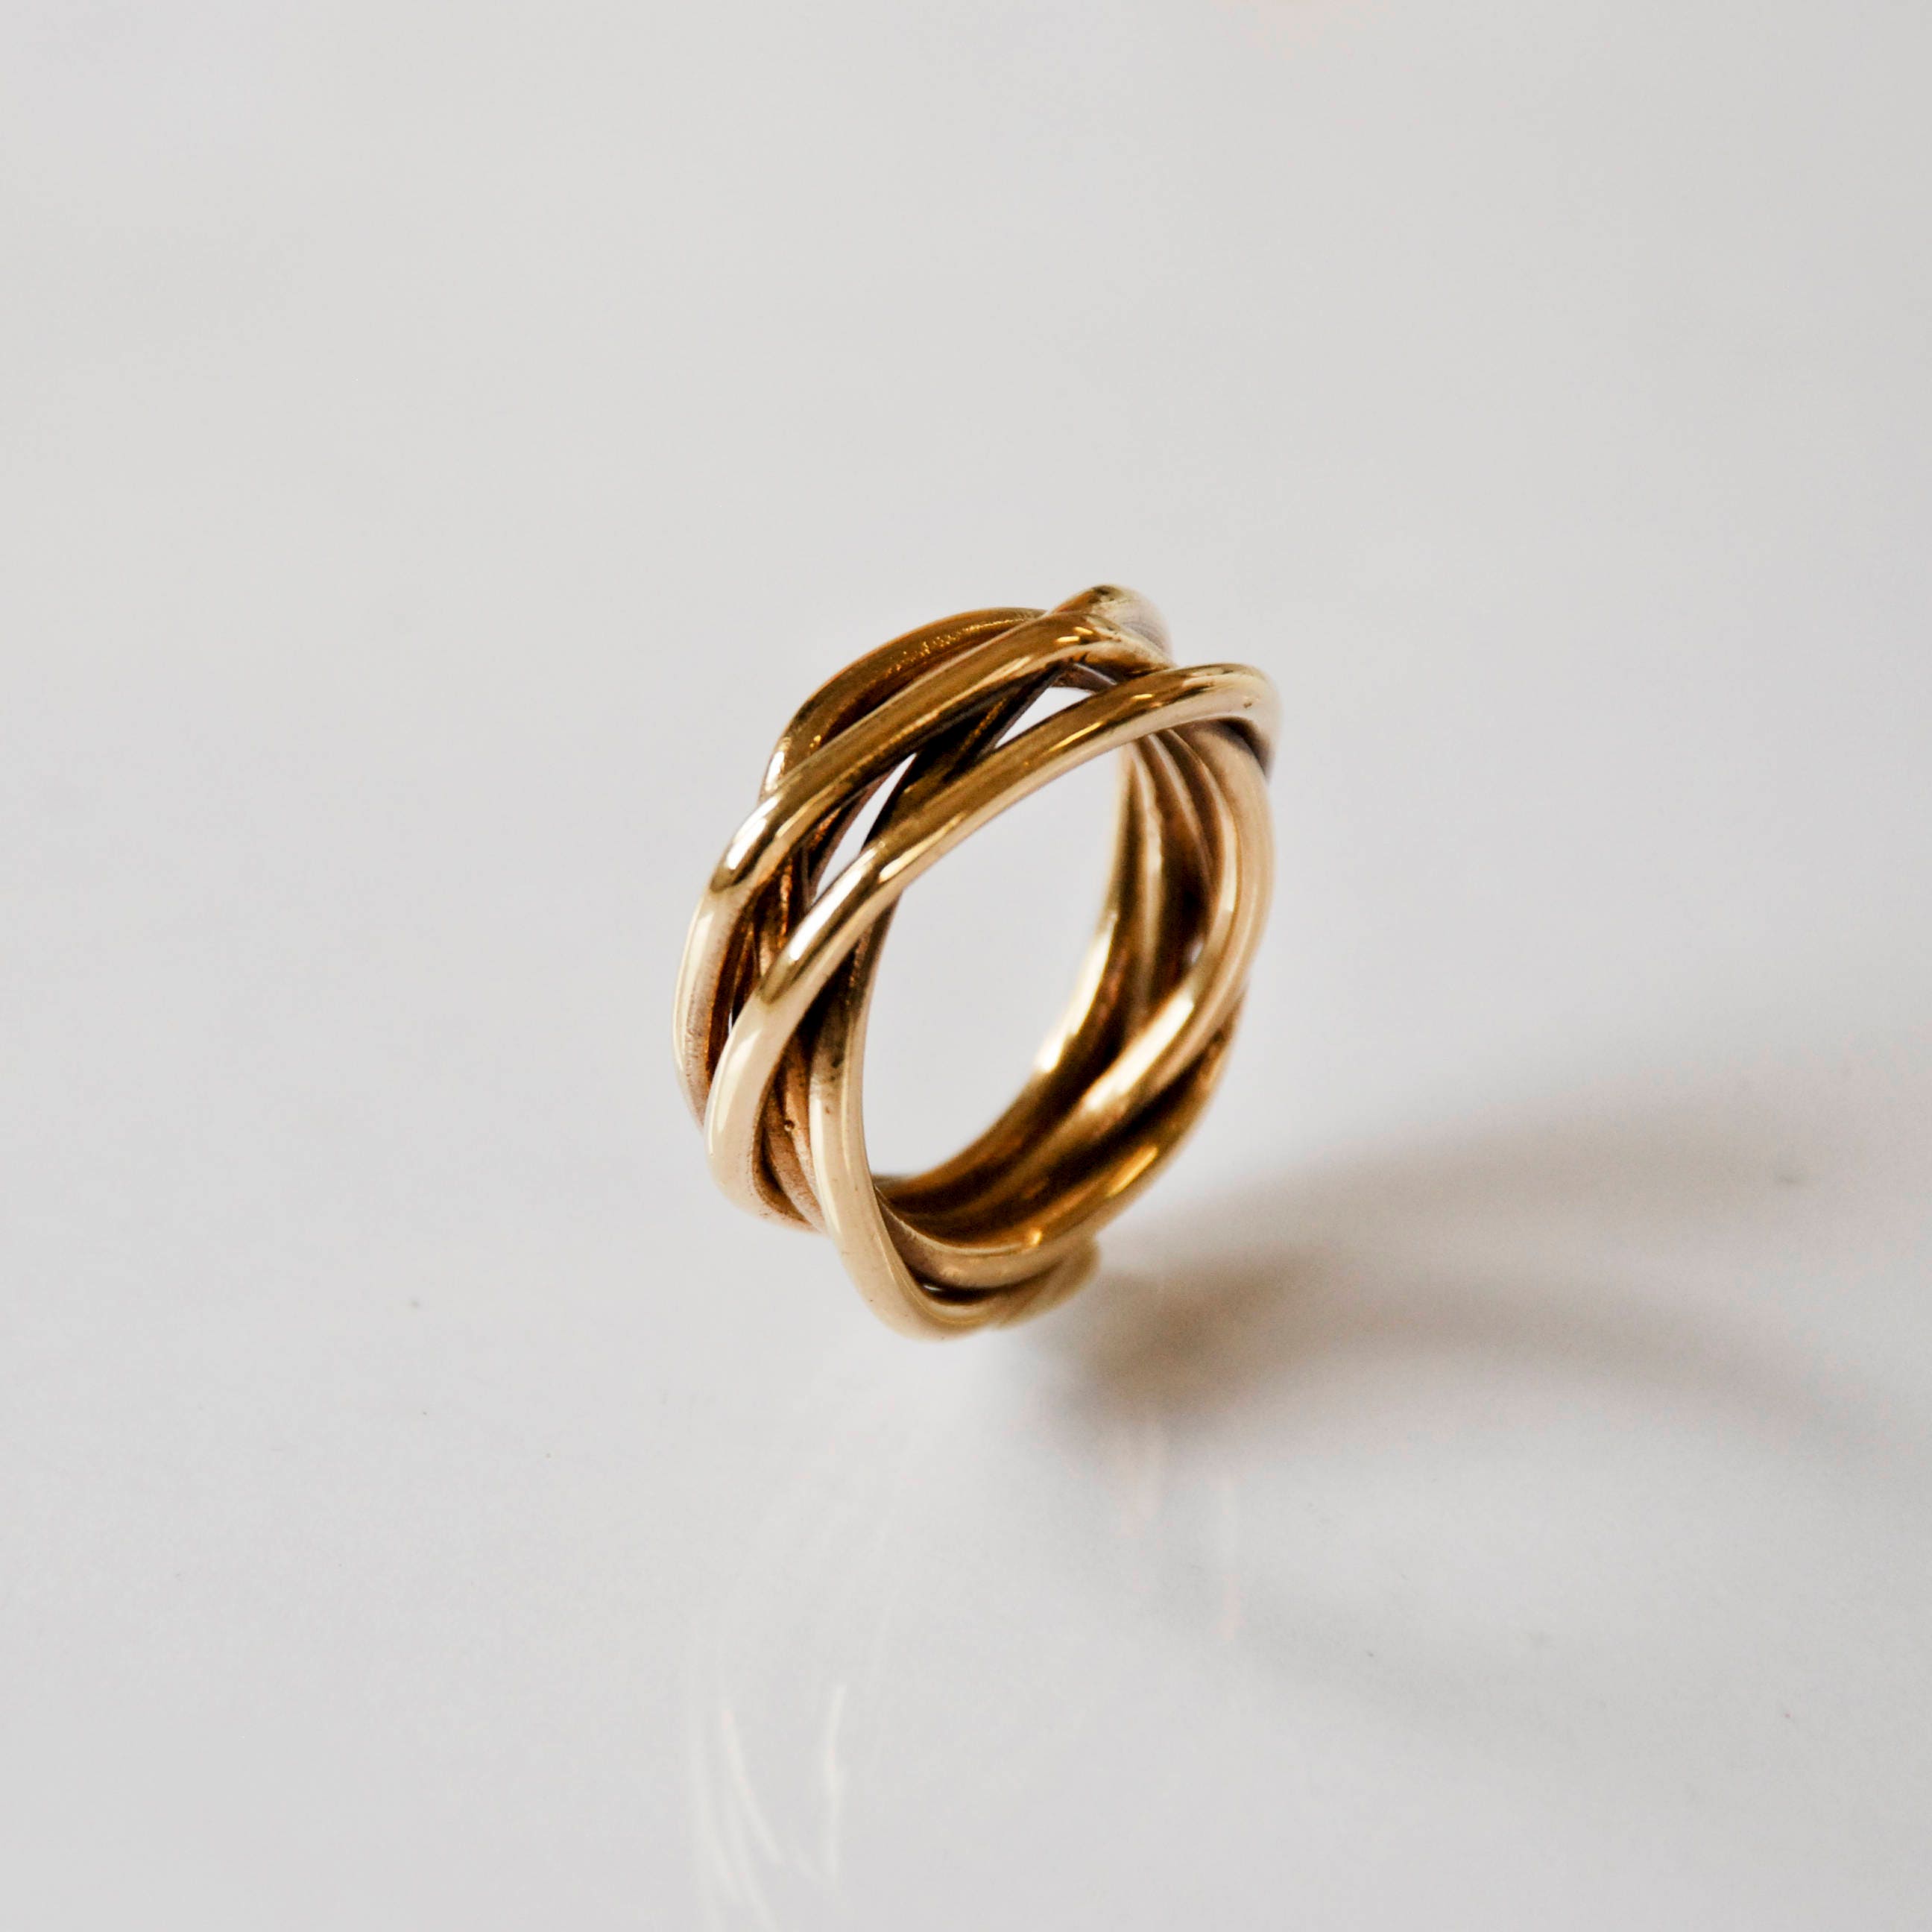 Unisex Baby Gold Rings at Rs 7000 in Jaipur | ID: 2849901692048